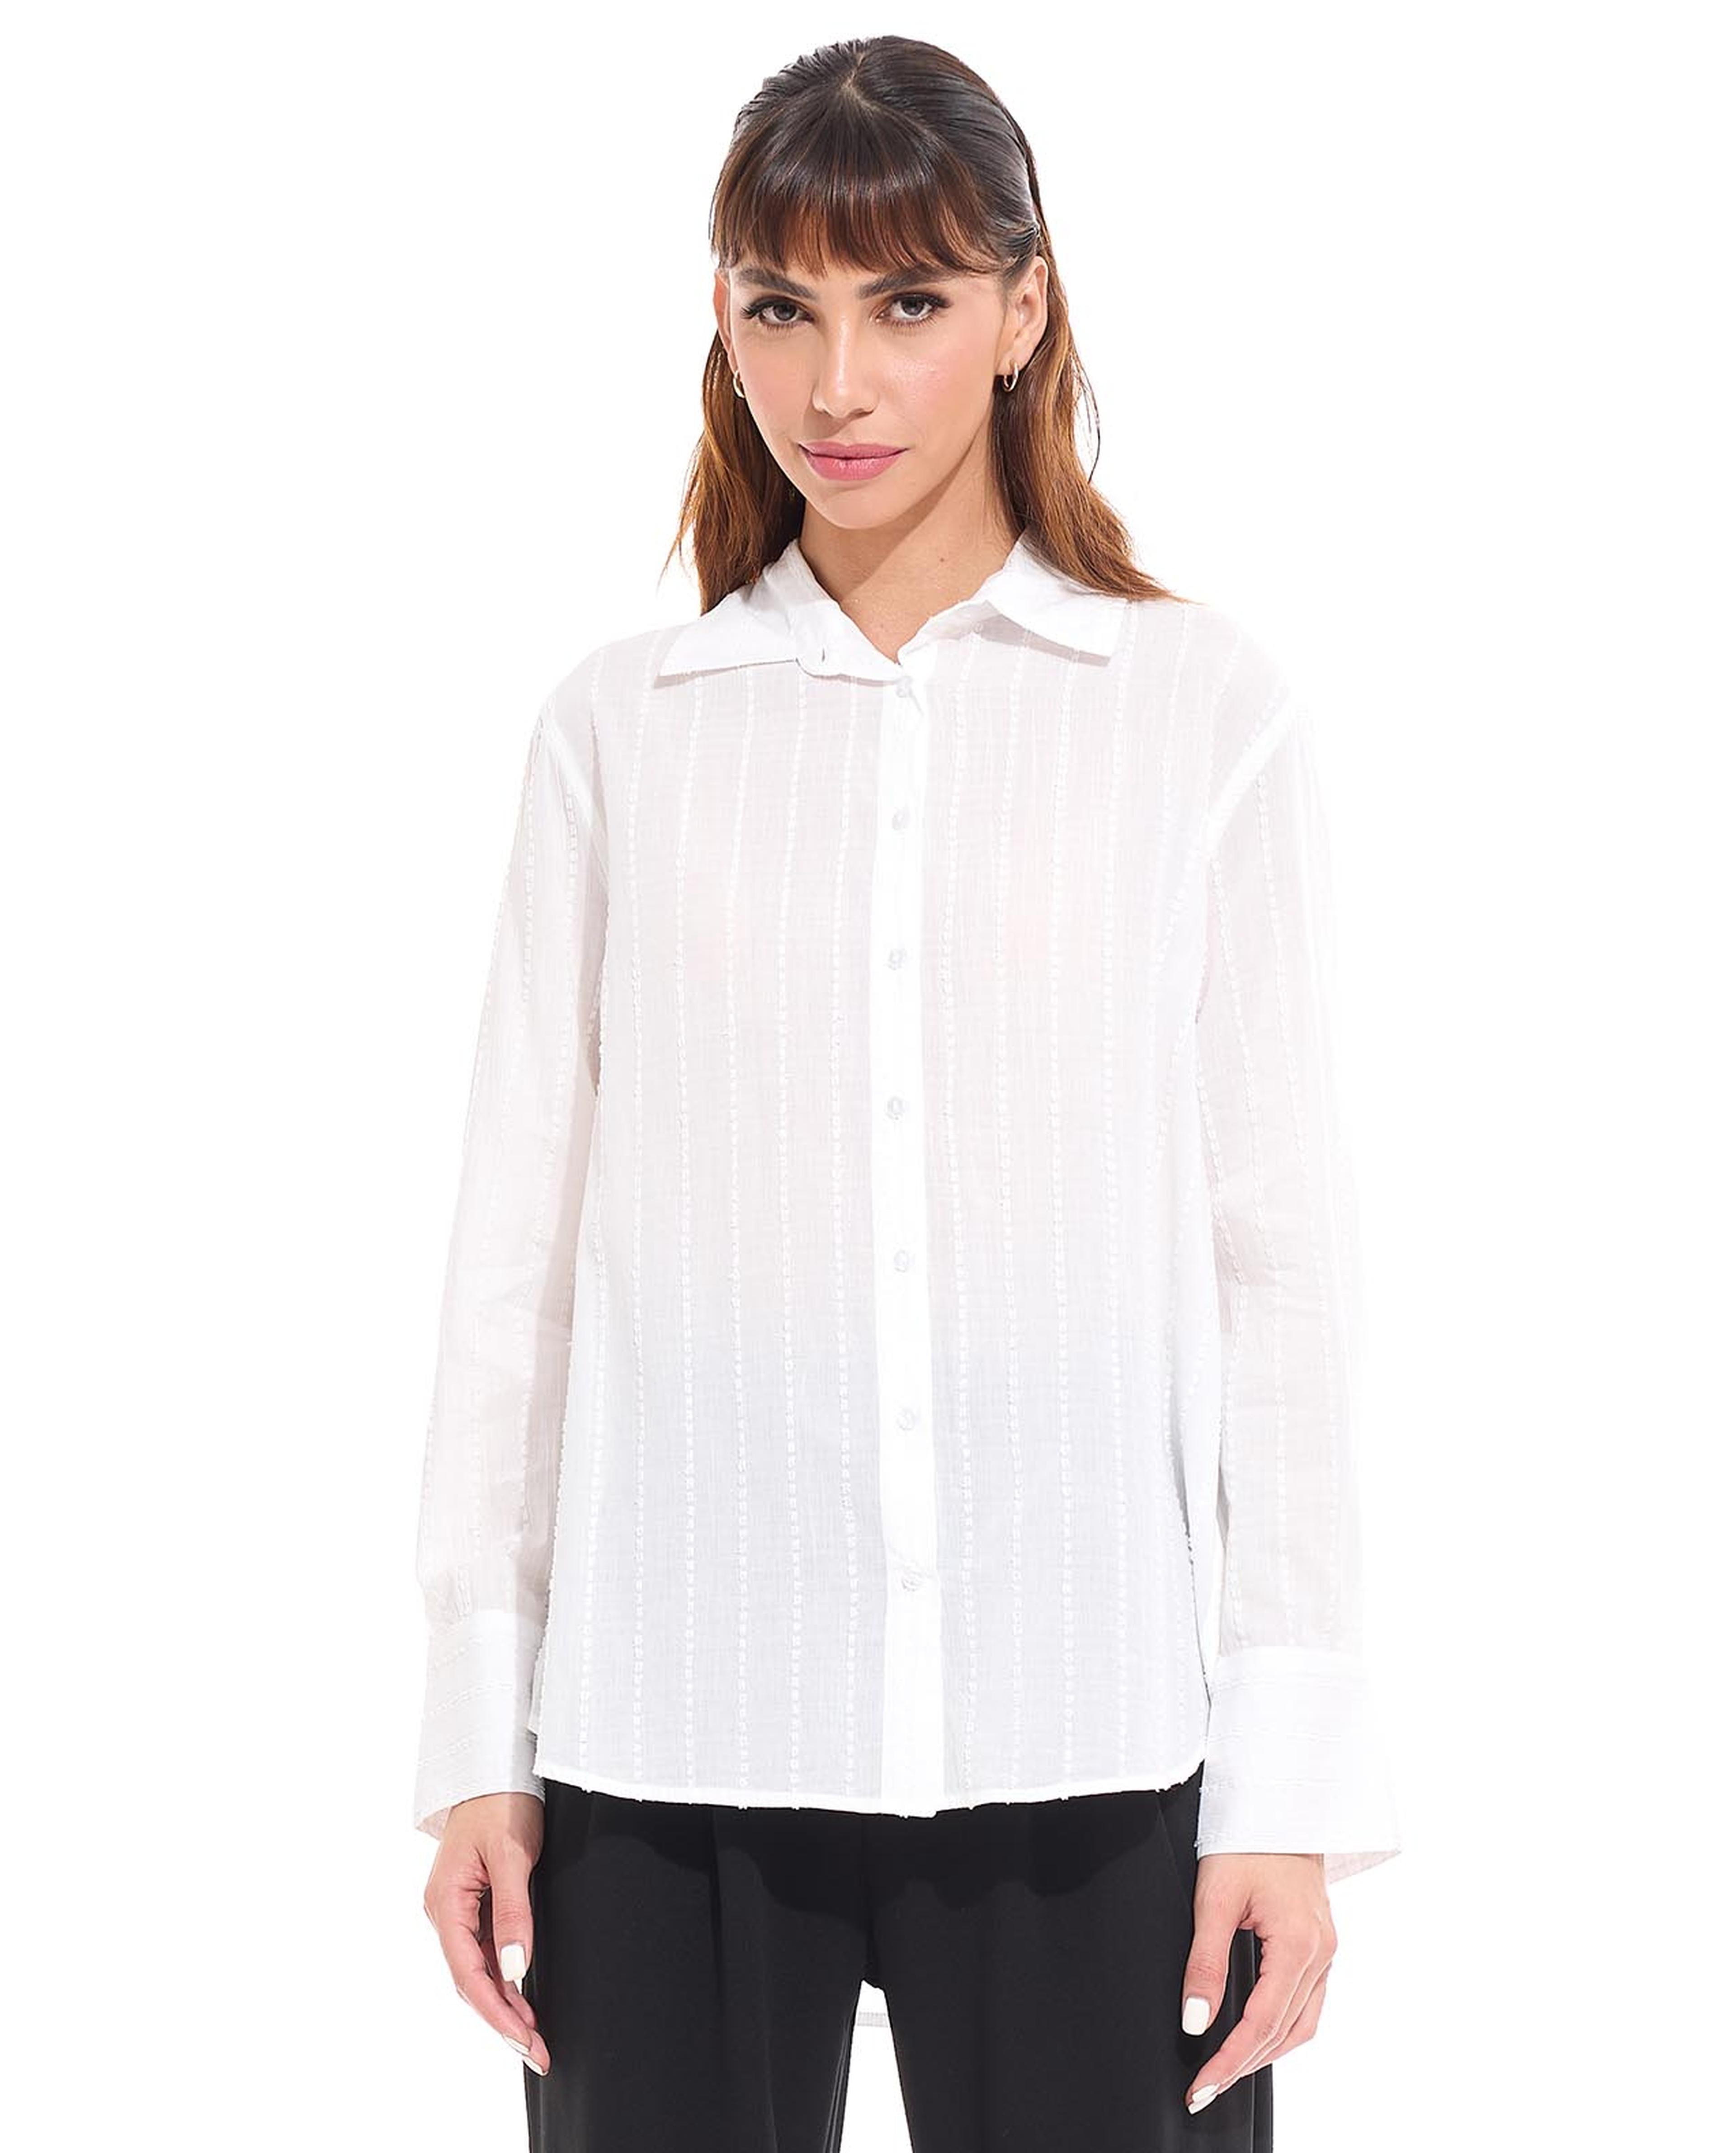 Woven Shirt with Classic Collar and Long Sleeves